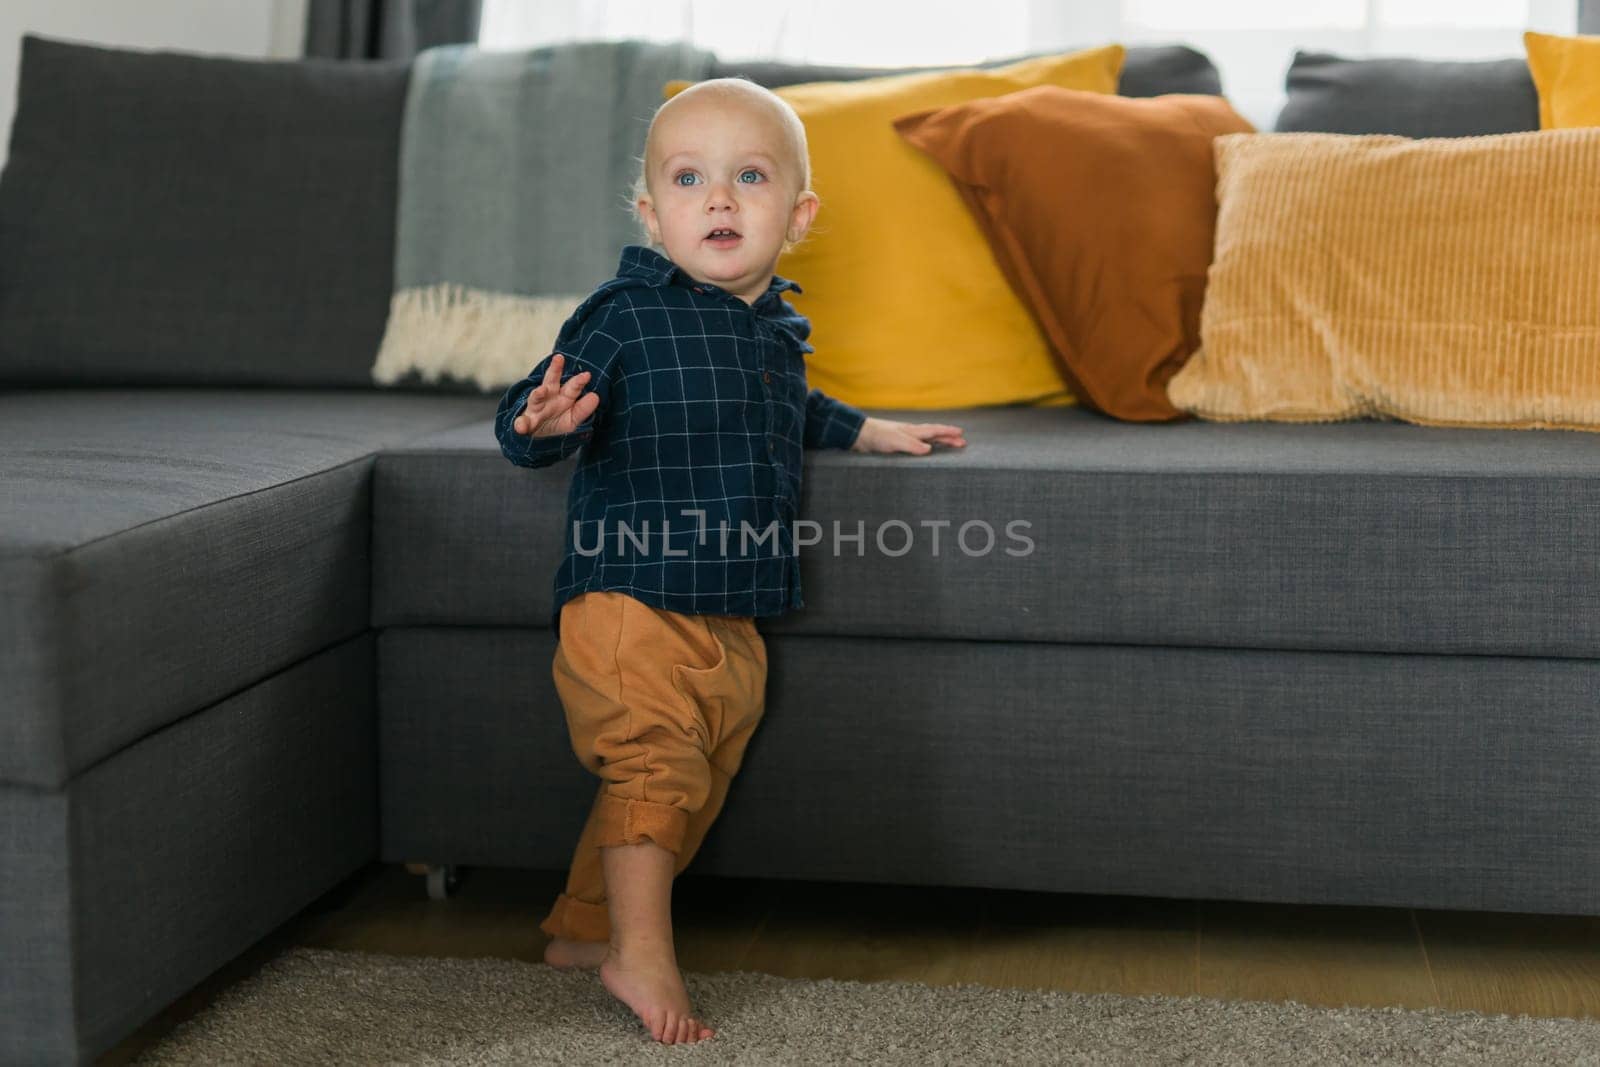 Toddler boy laughing having fun standing near sofa in living room at home copy space. Adorable baby making first steps alone. Happy childhood and child care concept by Satura86